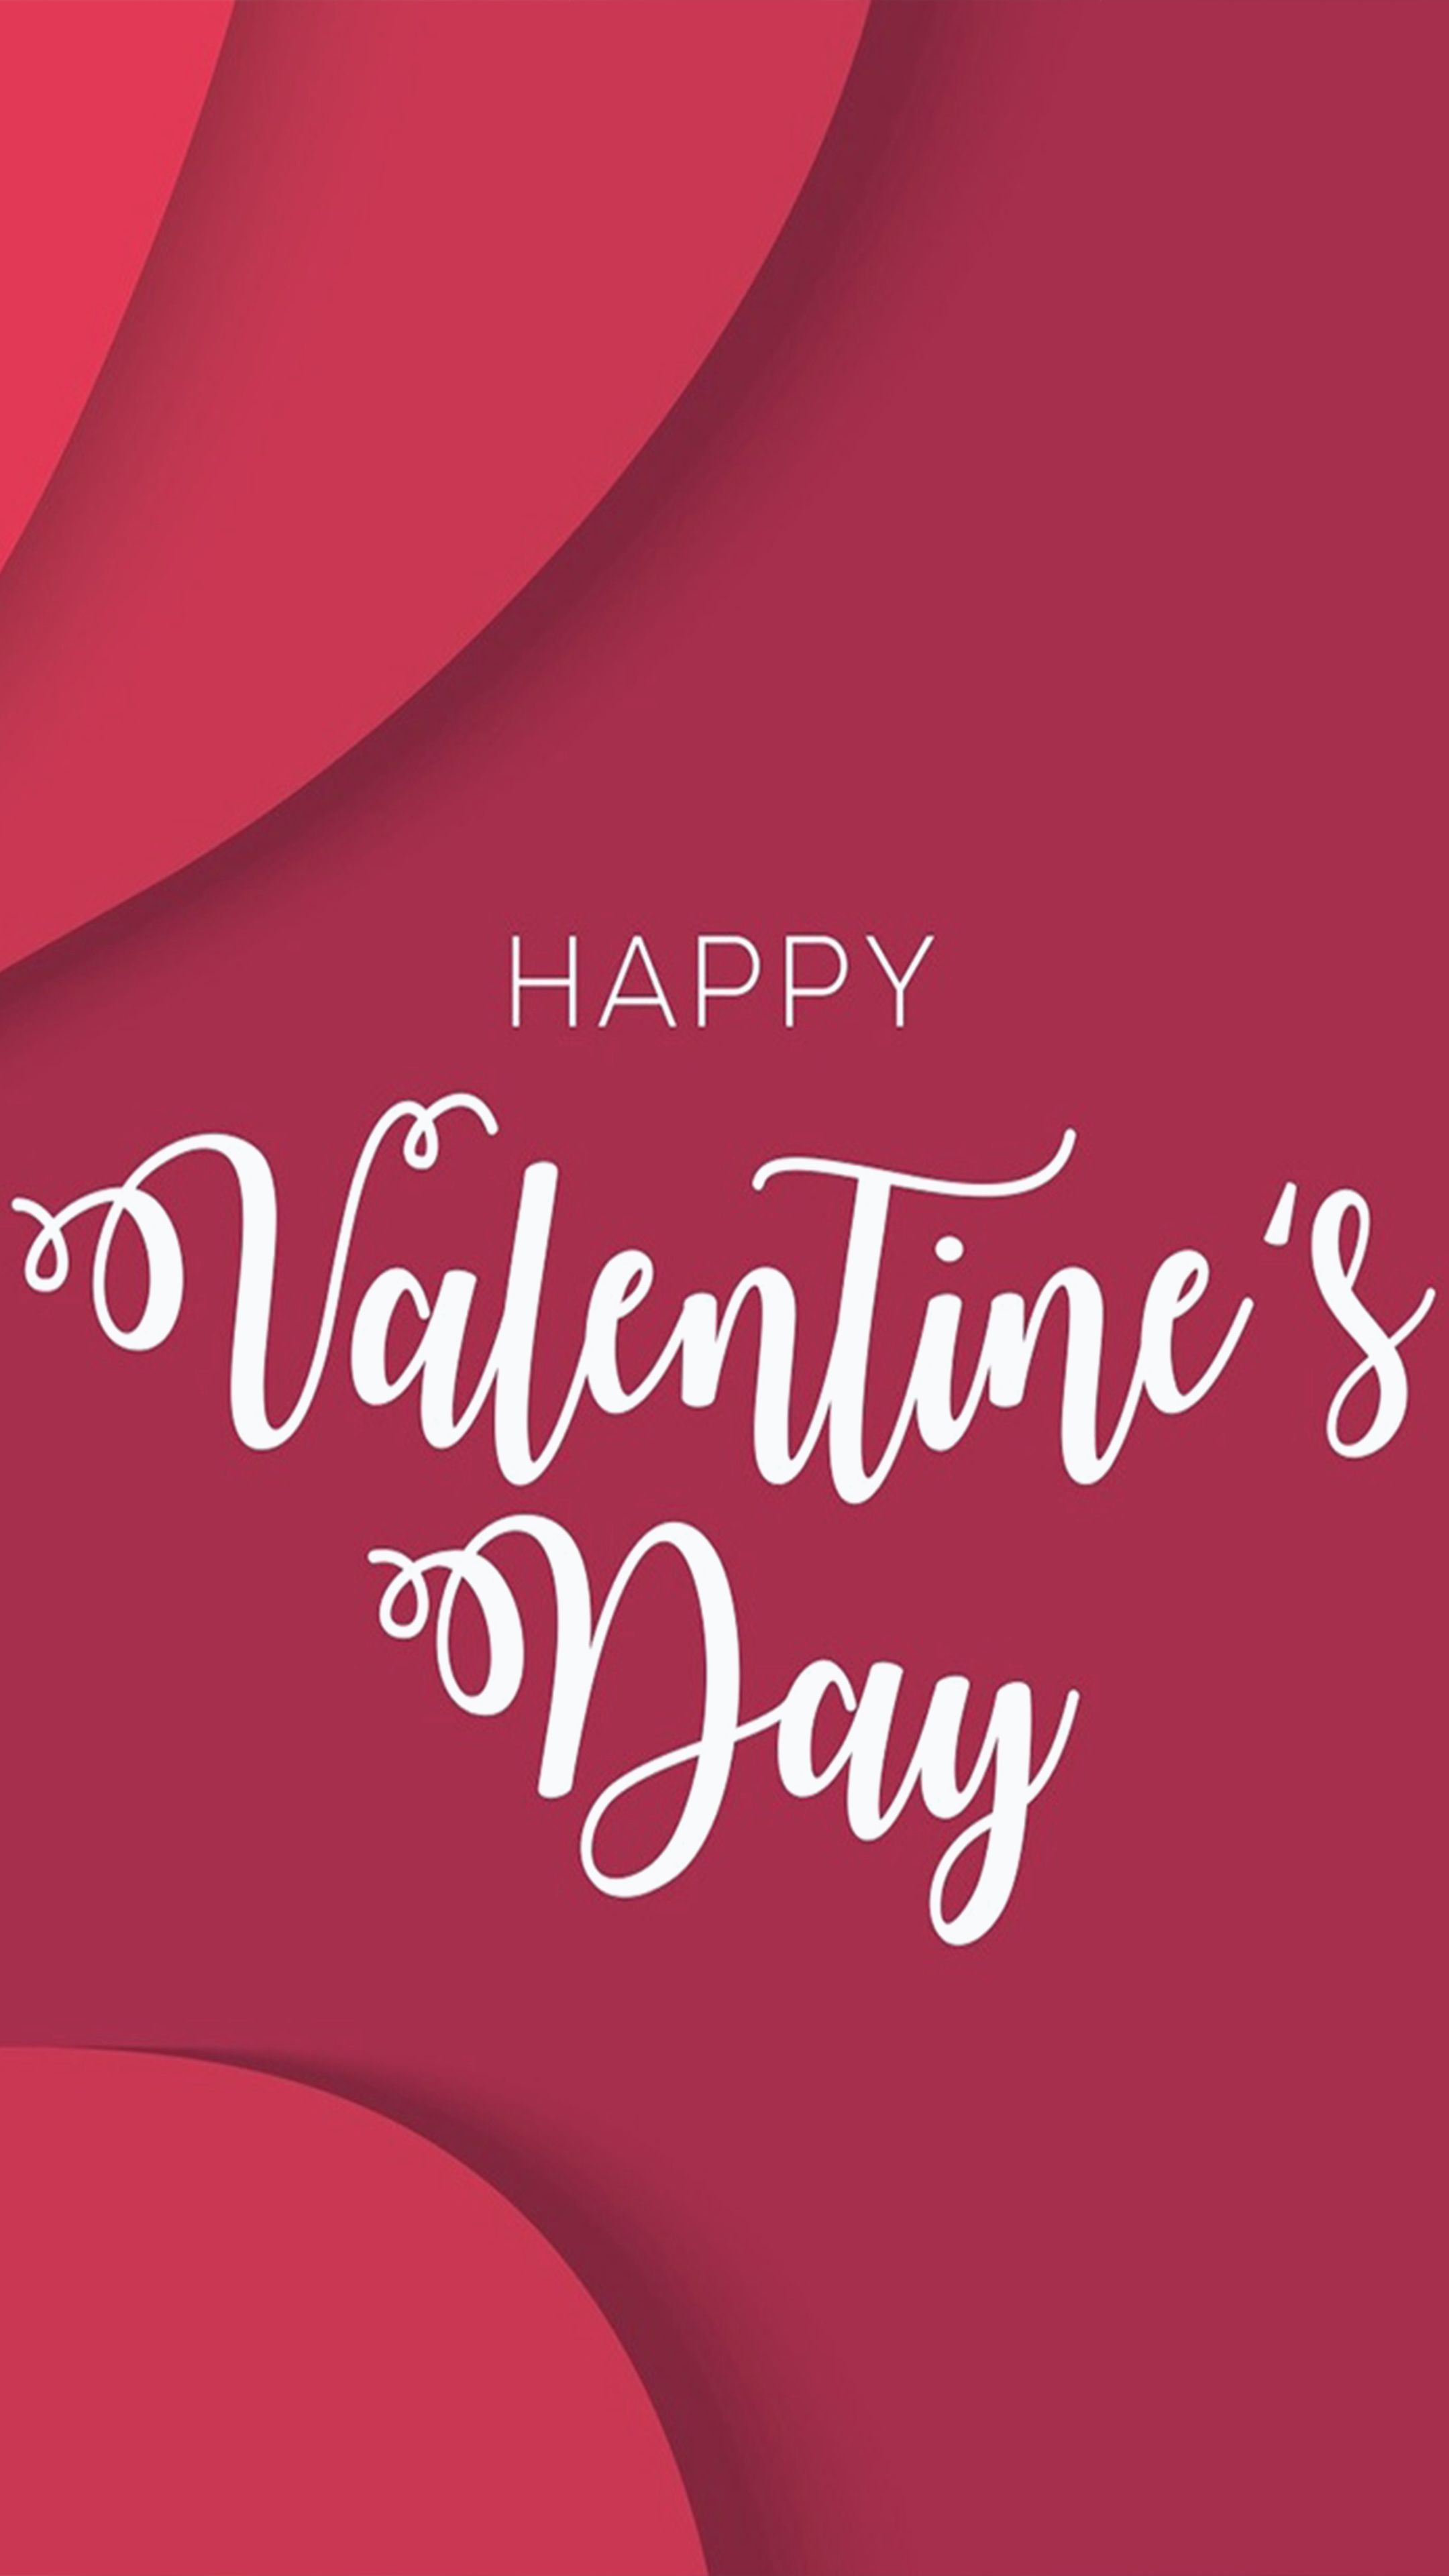 Download Happy Valentines Day Free Pure 4K Ultra HD Mobile. Happy valentines day, Happy valentine, Valentines wallpaper